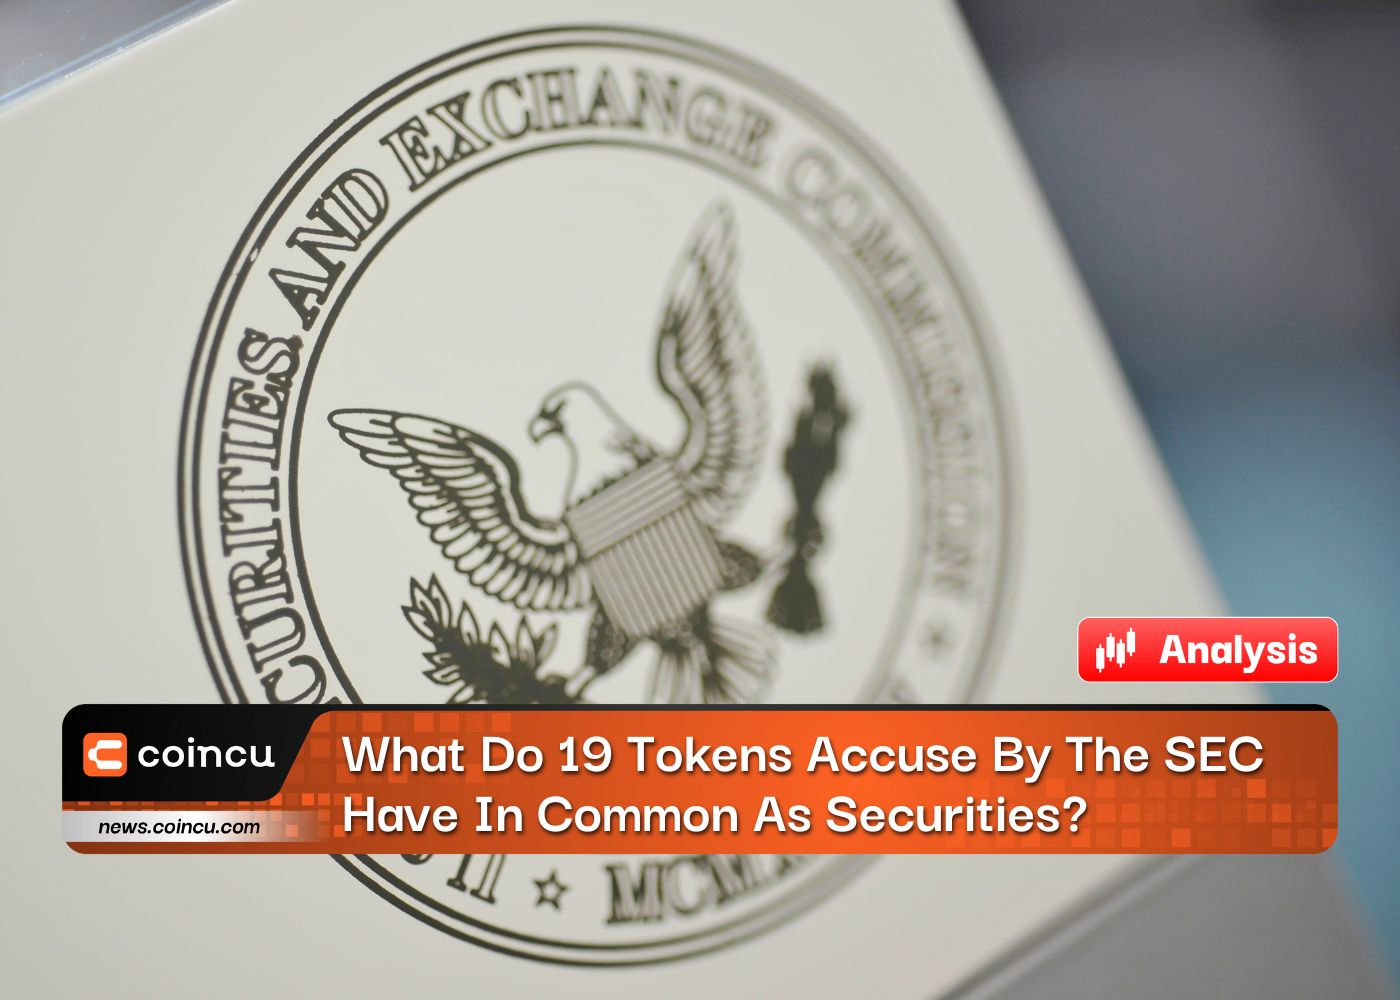 What Do 19 Tokens Accuse By The SEC Have In Common As Securities?